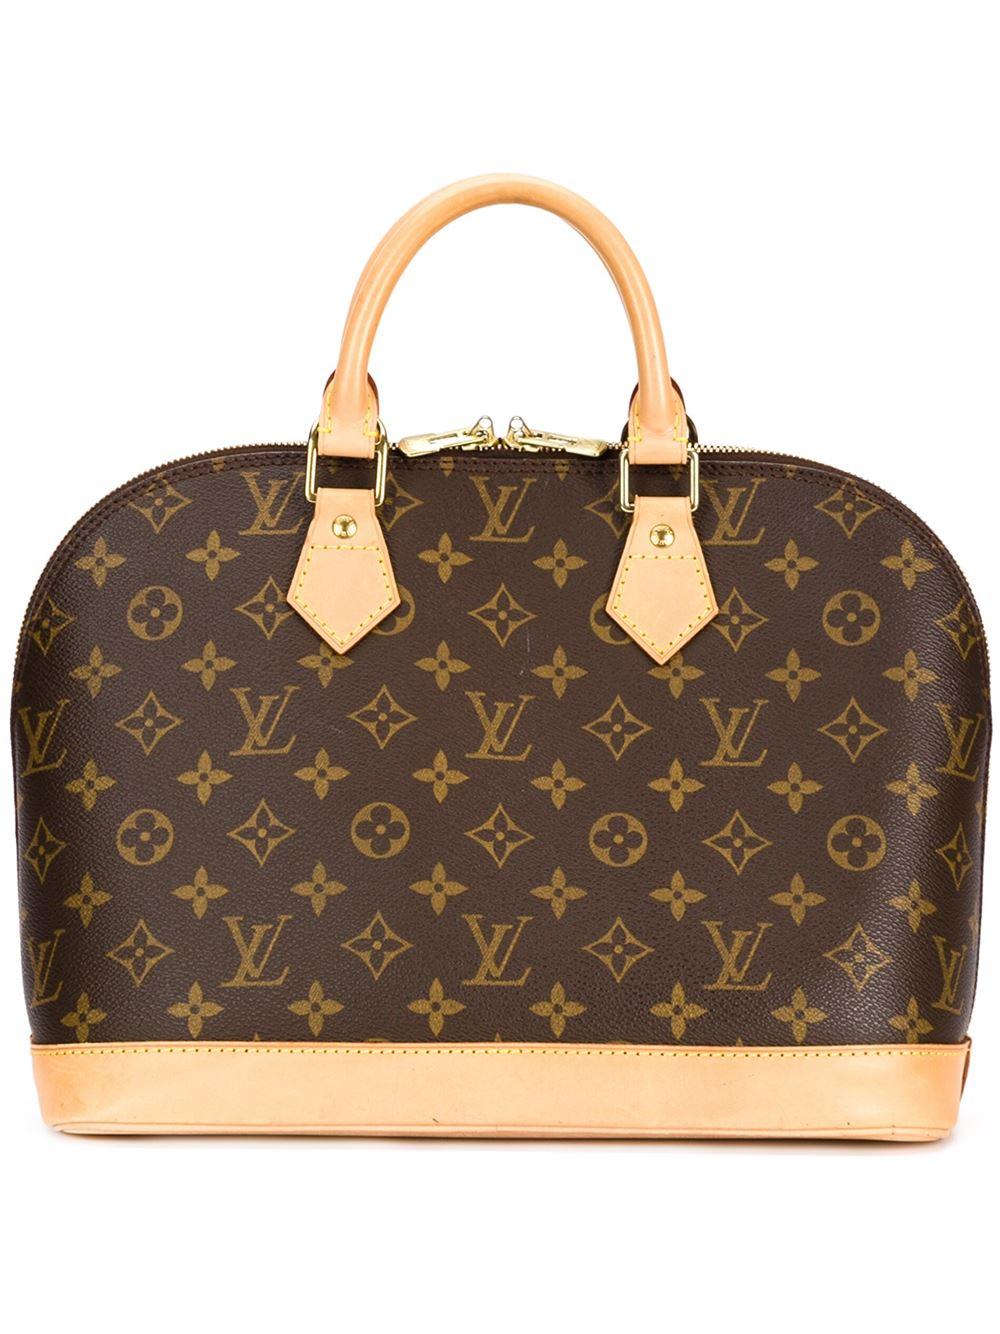 Lyst - Louis vuitton Signature Tote in Brown